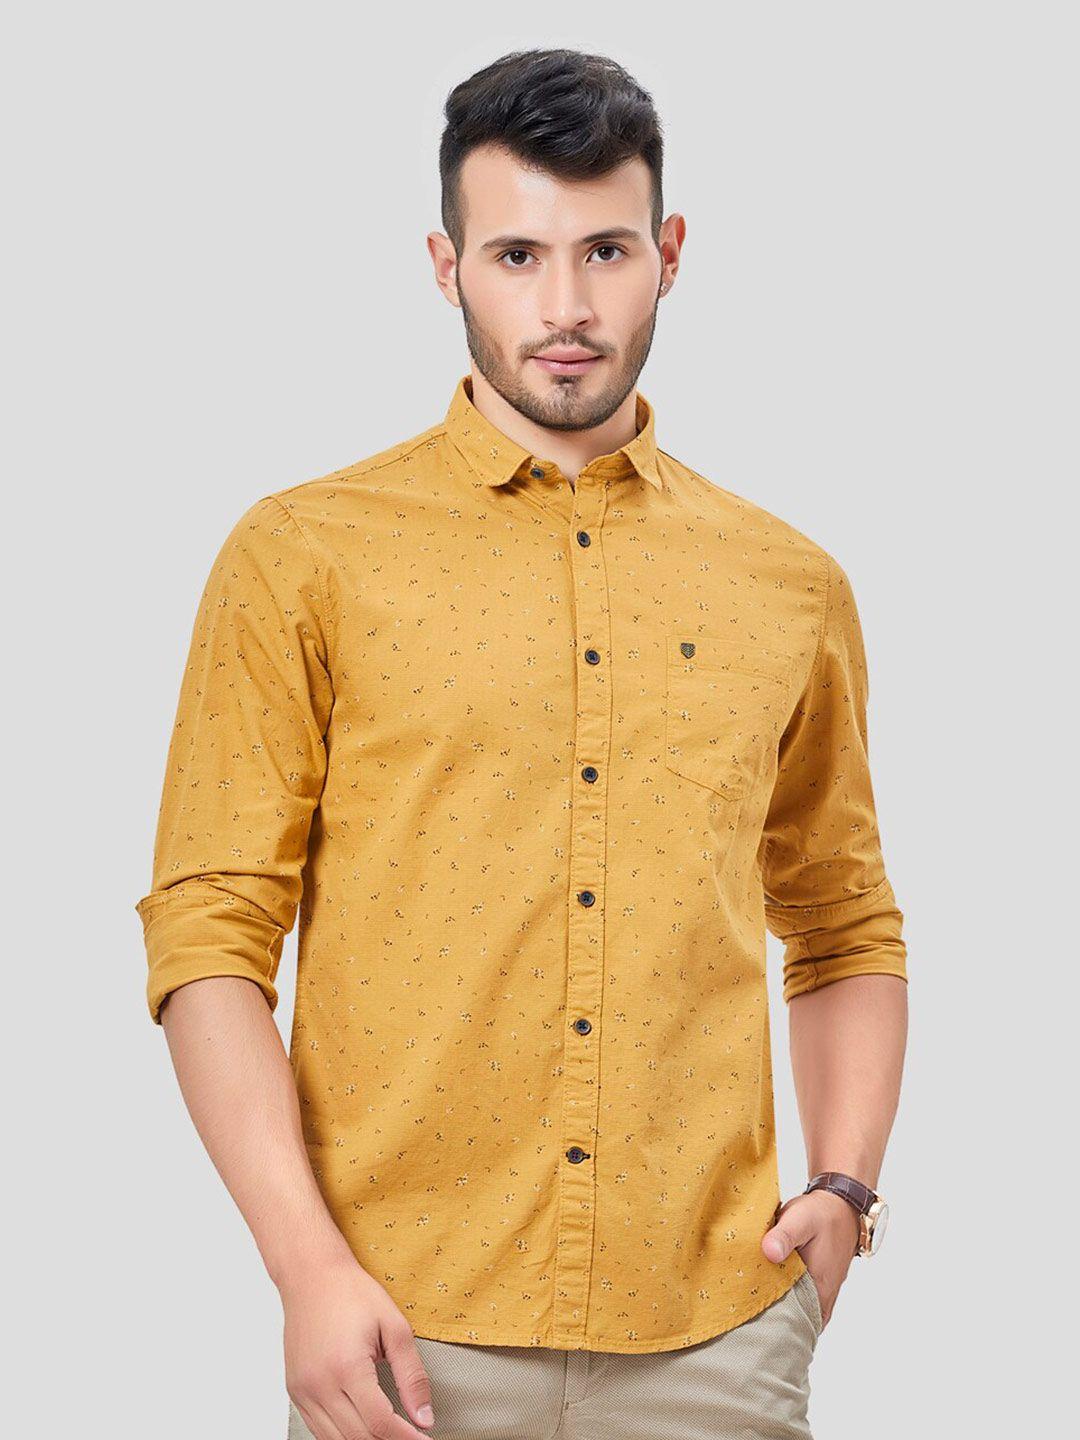 oxemberg-men-mustard-yellow-classic-slim-fit-floral-printed-casual-shirt